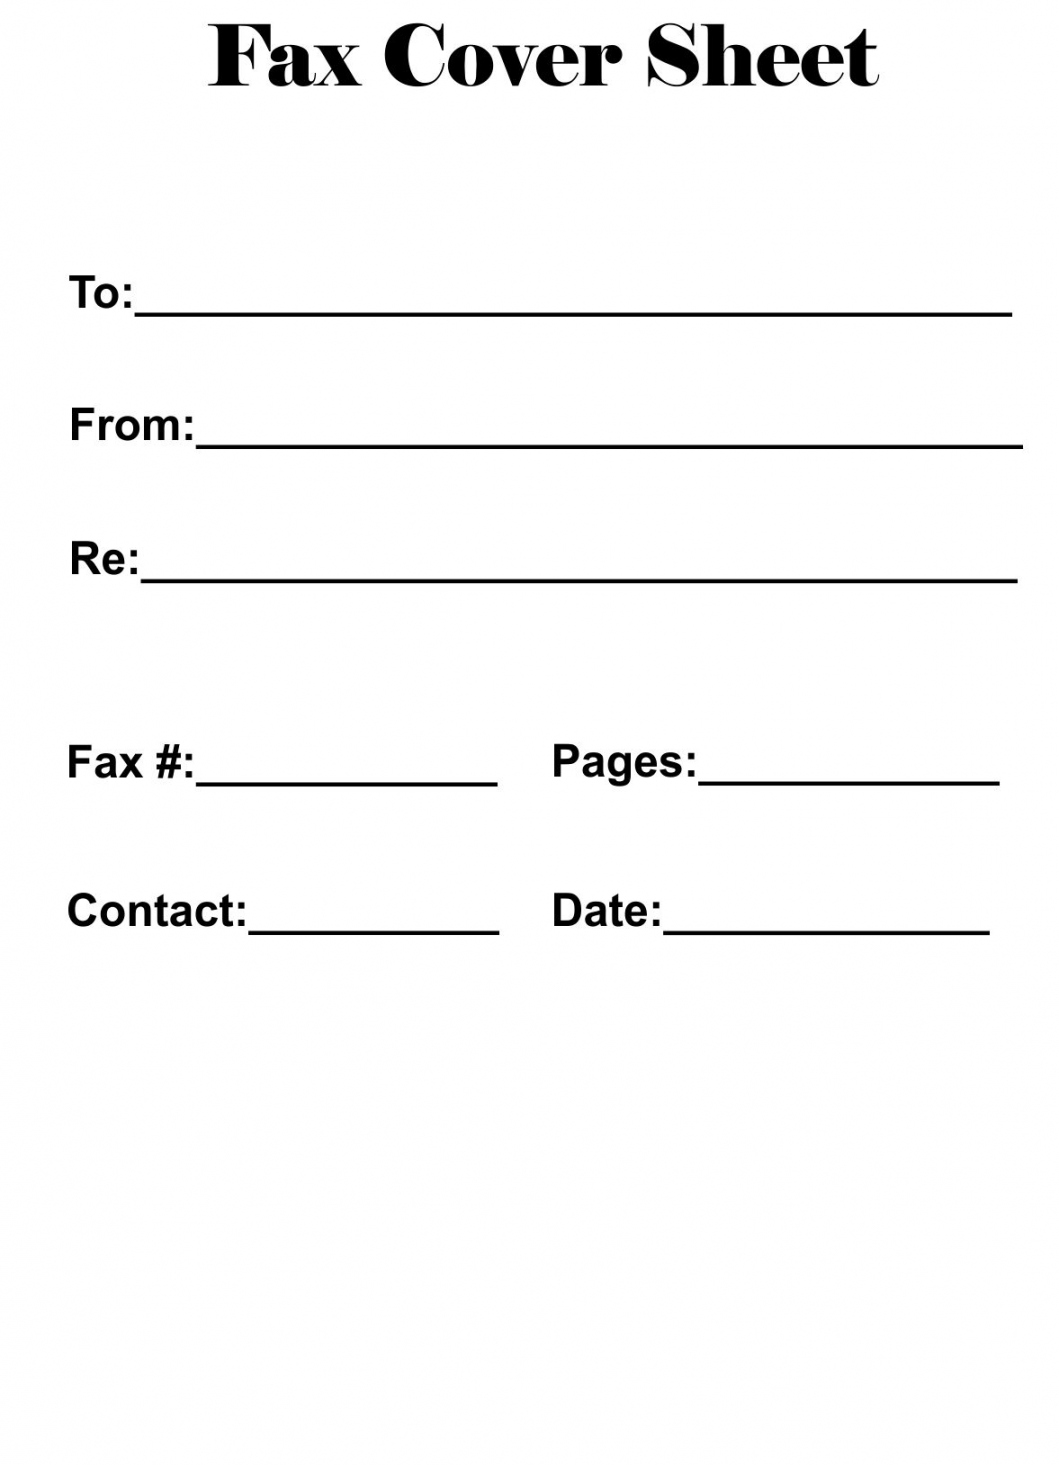 Free Fax Cover Sheet Printable - Printable - Fancy Fax Cover Sheet Template  Fax cover sheet, Cover sheet